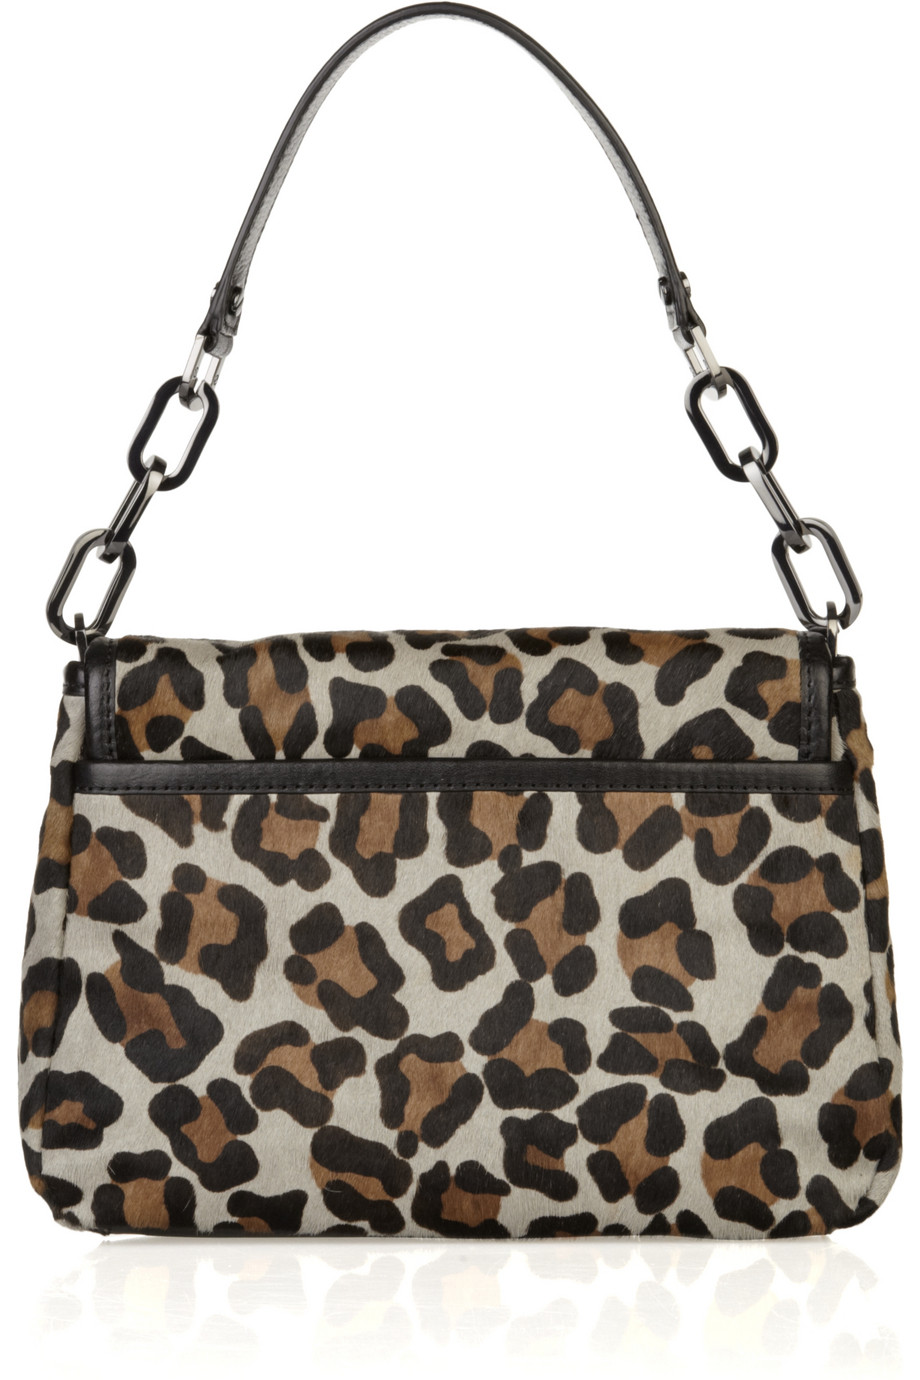 Tory burch Leopard-print Calf Hair and Leather Bag | Lyst